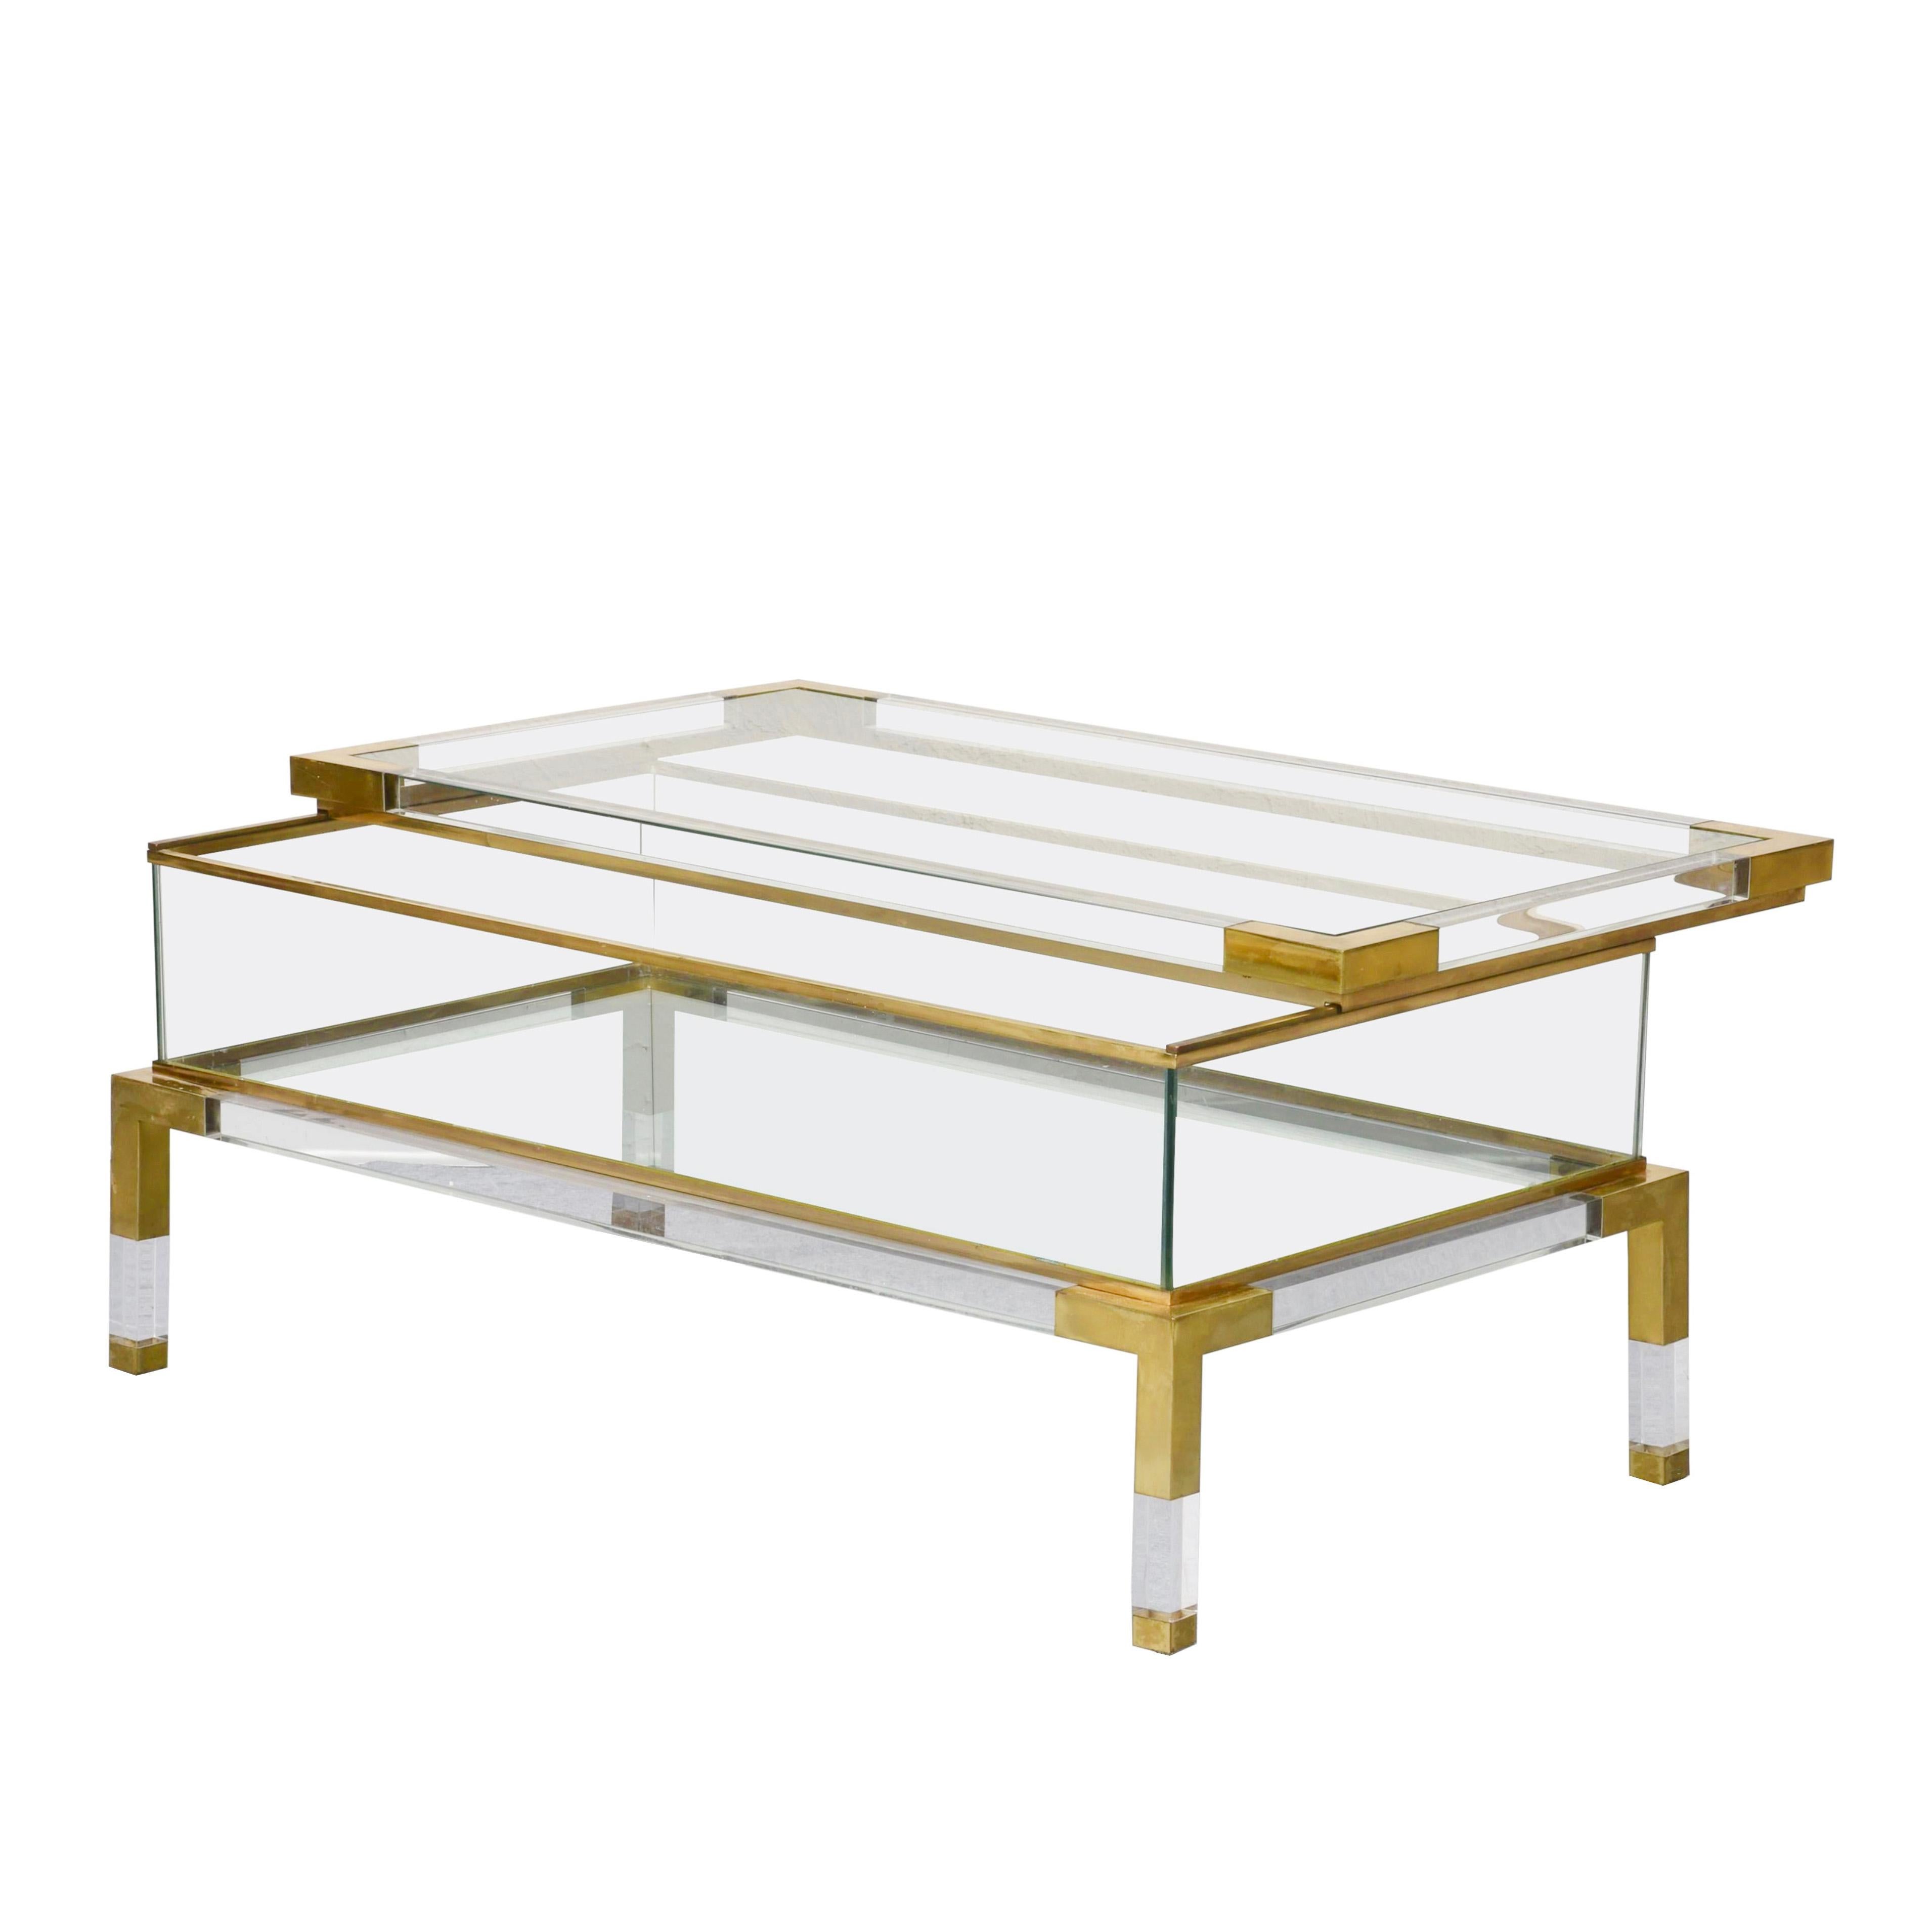 Beautiful mid-century coffee table in brass and lucite with sliding top shelf. This fantastic piece was designed by Maison Jansen in France during the 1970s.

This fantastic item is in good condition and has a double glazed top. The top can slide